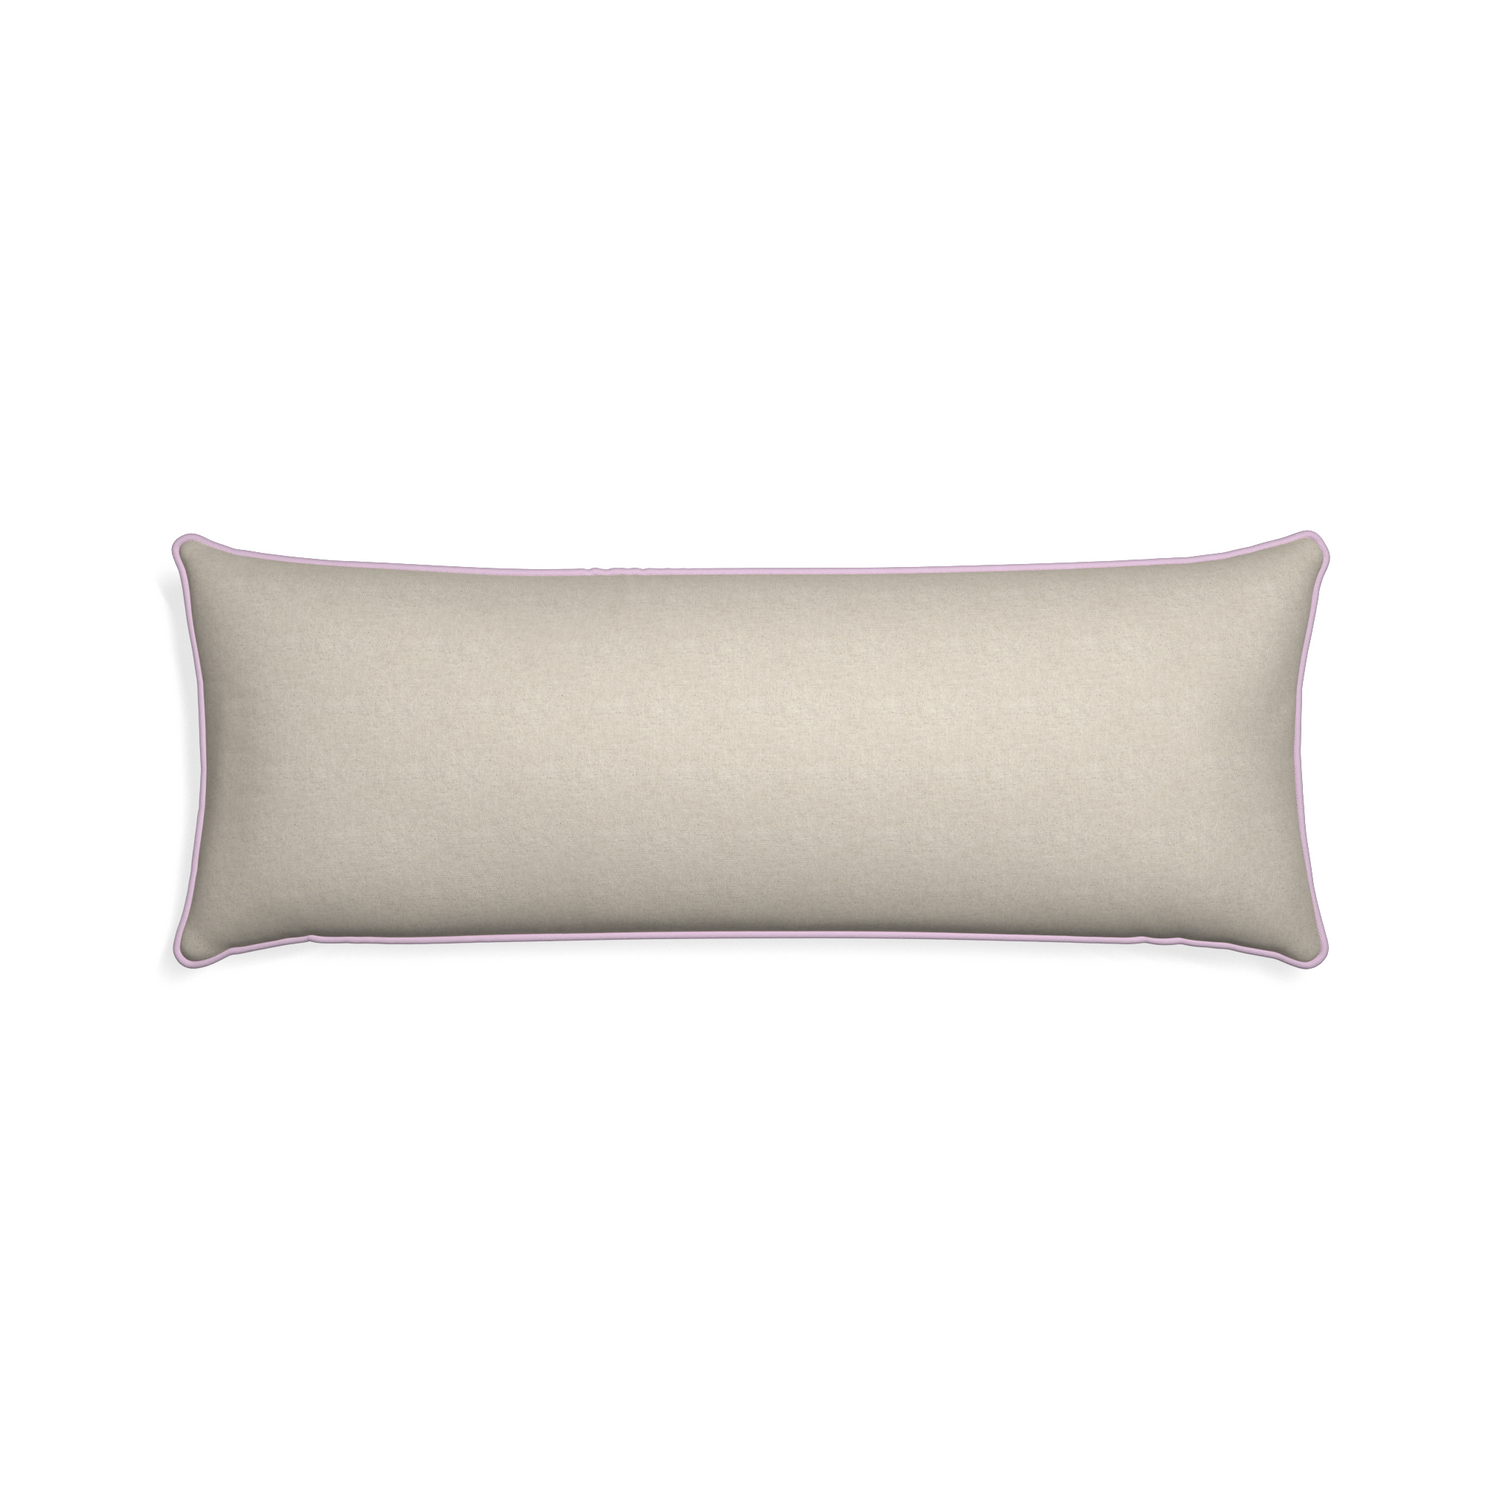 Xl-lumbar oat custom light brownpillow with l piping on white background